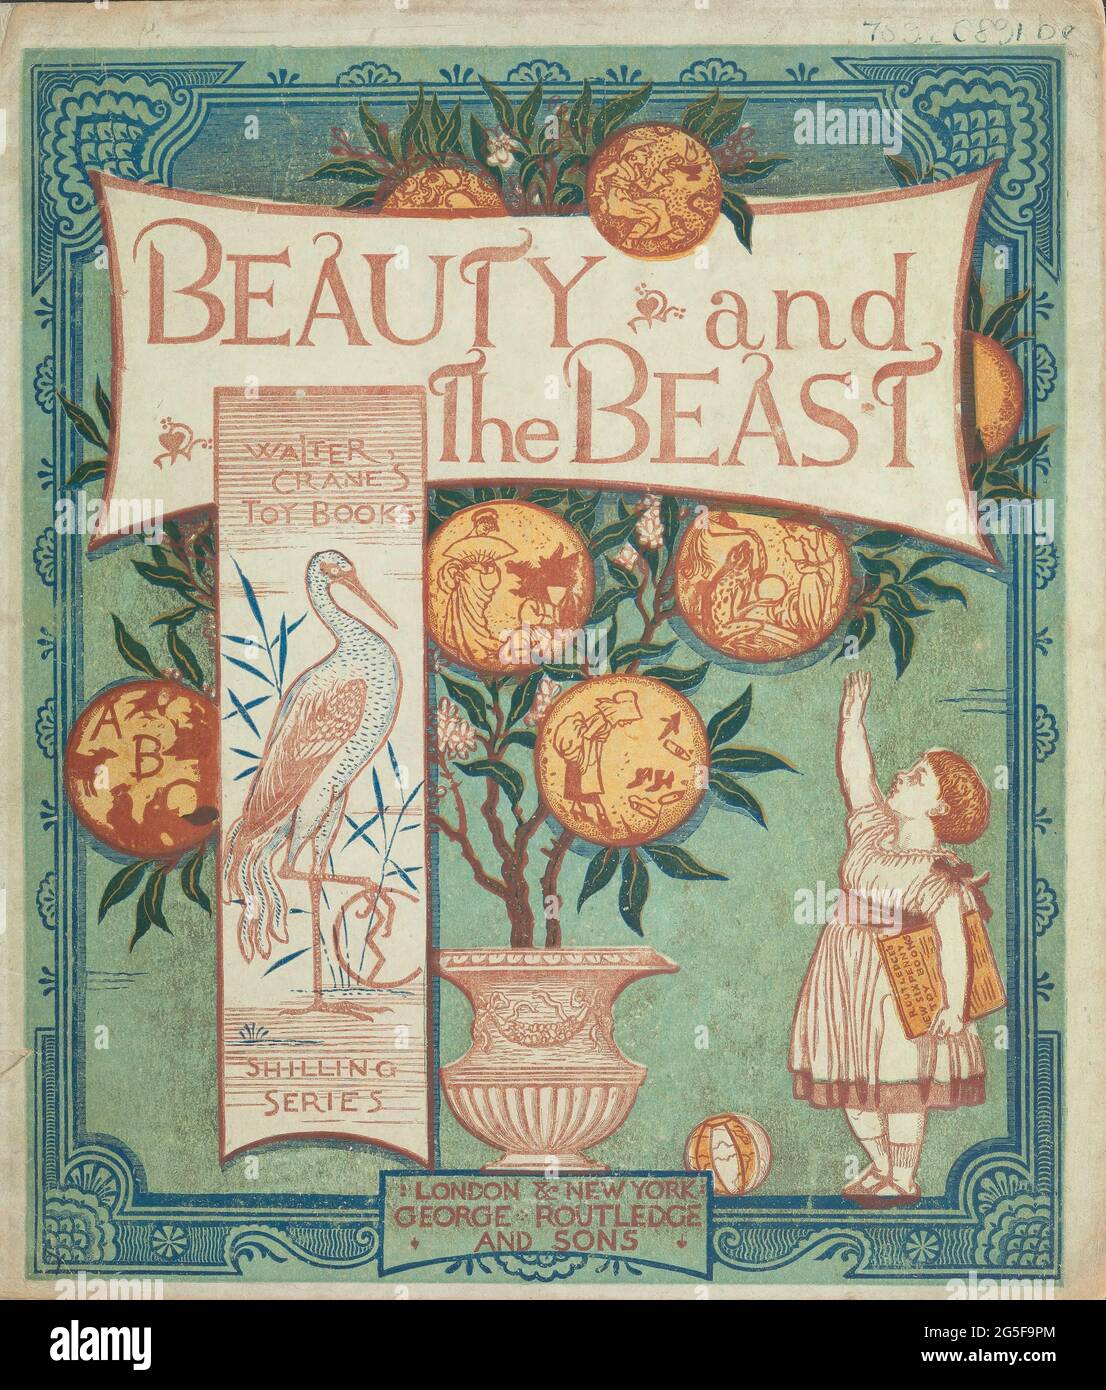 book cover of ' Beauty and the beast ' by Walter Crane, Edmund Evans, Published in London & New York by George Routledge and Sons in 1874. Beauty and the Beast (French: La Belle et la Bête) is a fairy tale written by French novelist Gabrielle-Suzanne Barbot de Villeneuve and published in 1740 in La Jeune Américaine et les contes marins (The Young American and Marine Tales). Its lengthy version was abridged, rewritten, and published by Jeanne-Marie Leprince de Beaumont in 1756 in Magasin des enfants (Children's Collection) to produce the version most commonly retold and later by Andrew Lang in Stock Photo